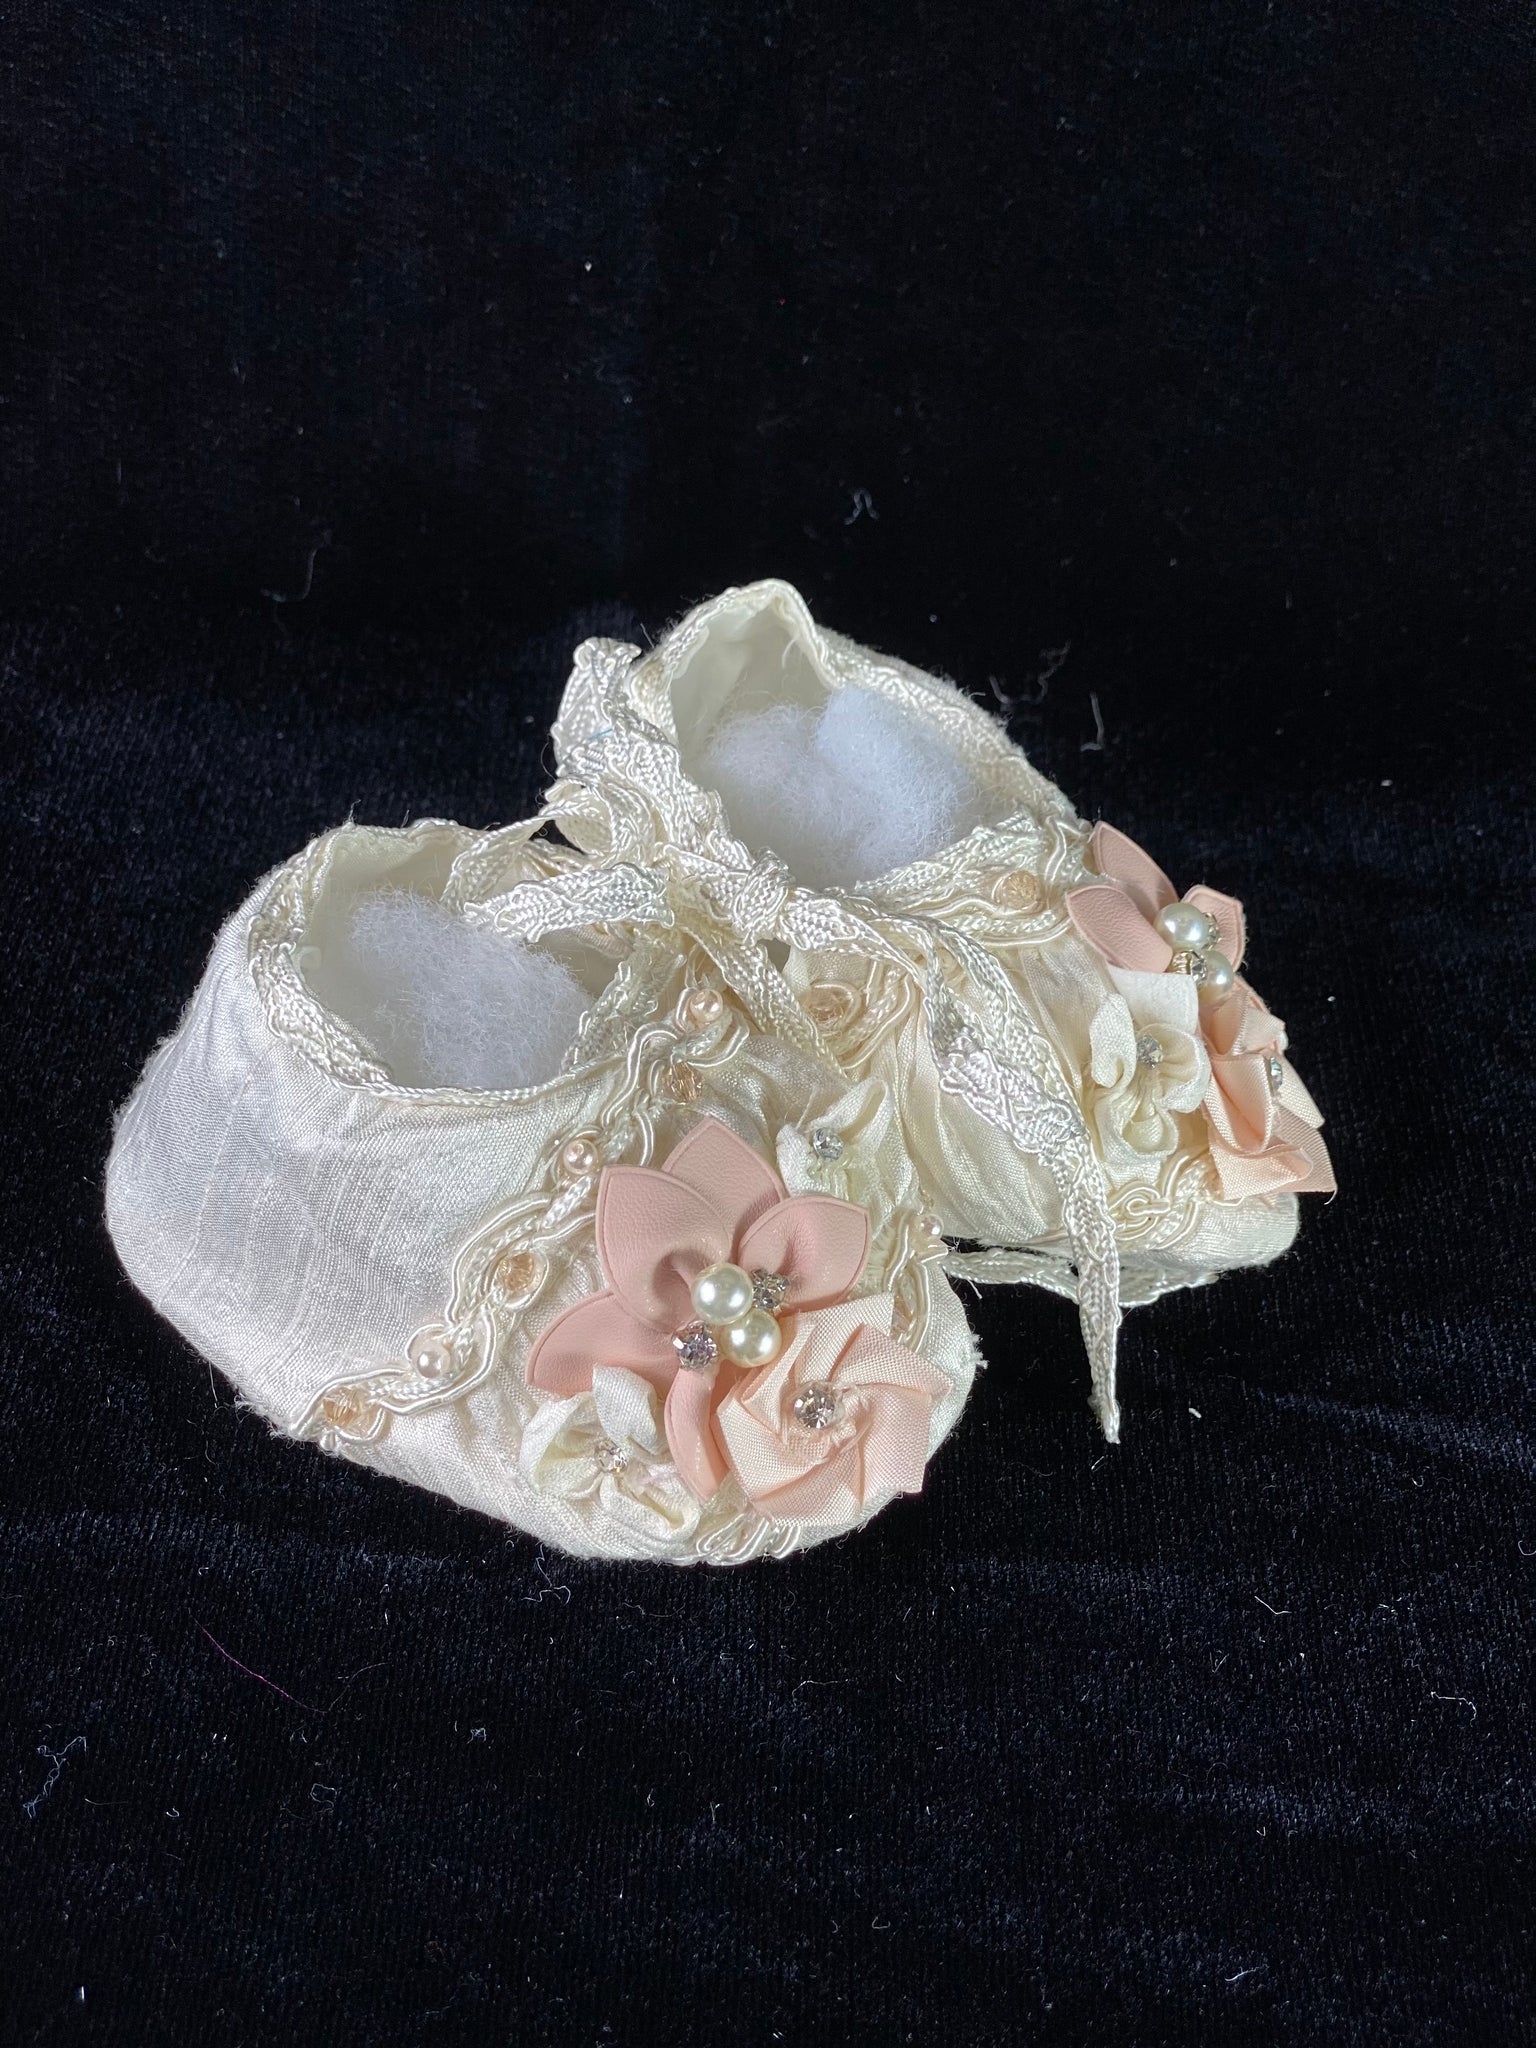 Elegant handmade ivory baby girl shoes with embroidery, lace, flowers, and jewels (pearls and crystals).